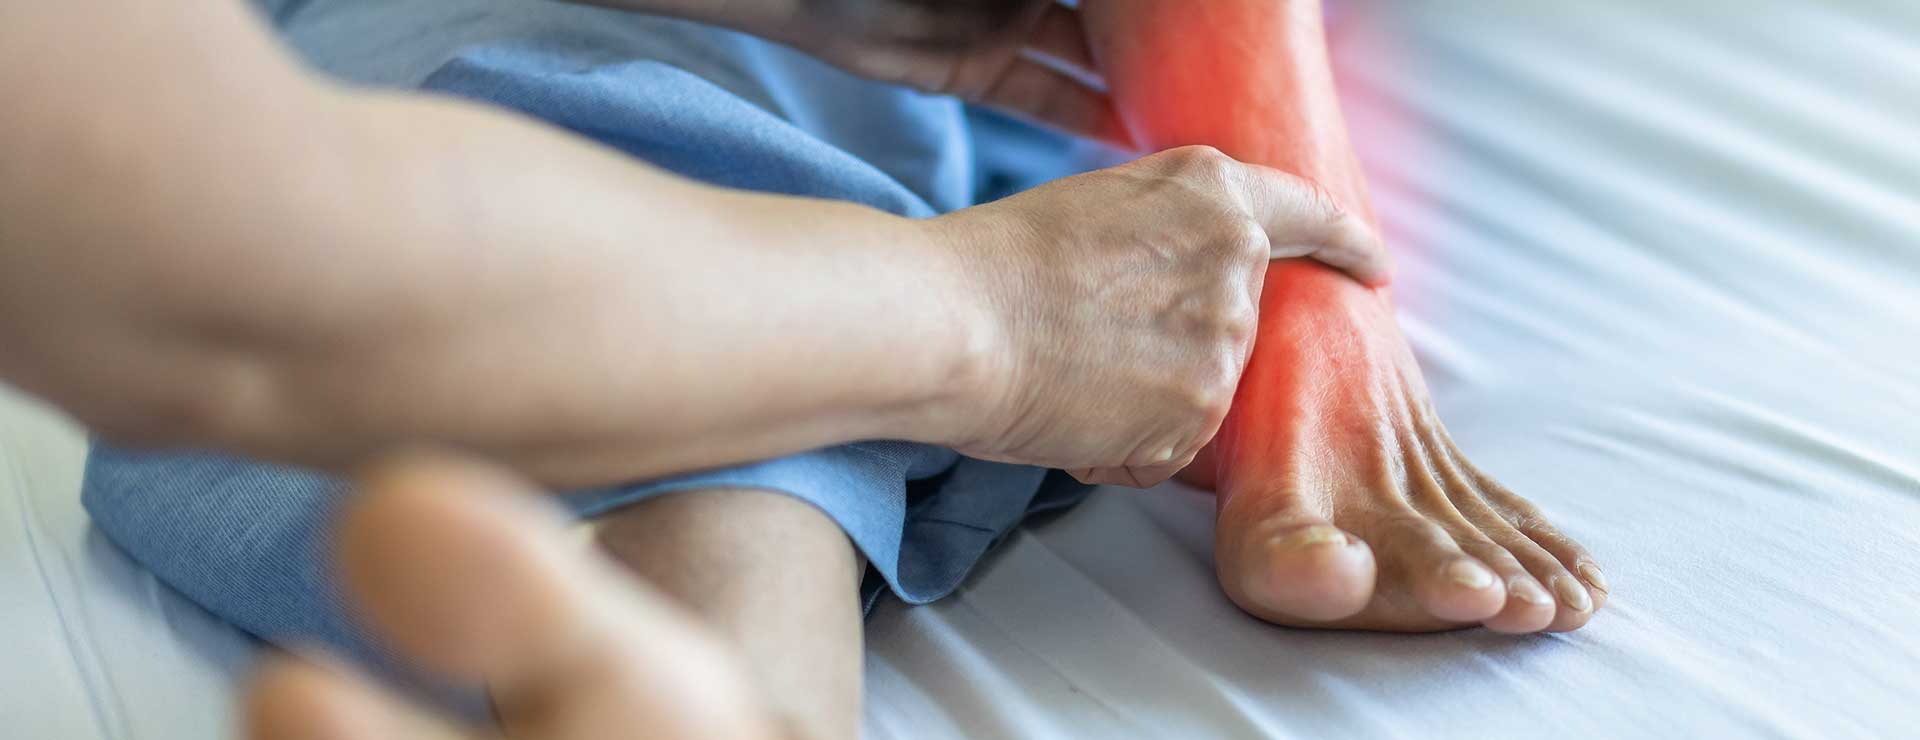 Coping With Plantar Fasciitis: Rocky Mountain Foot & Ankle Center: Foot & Ankle  Surgeons